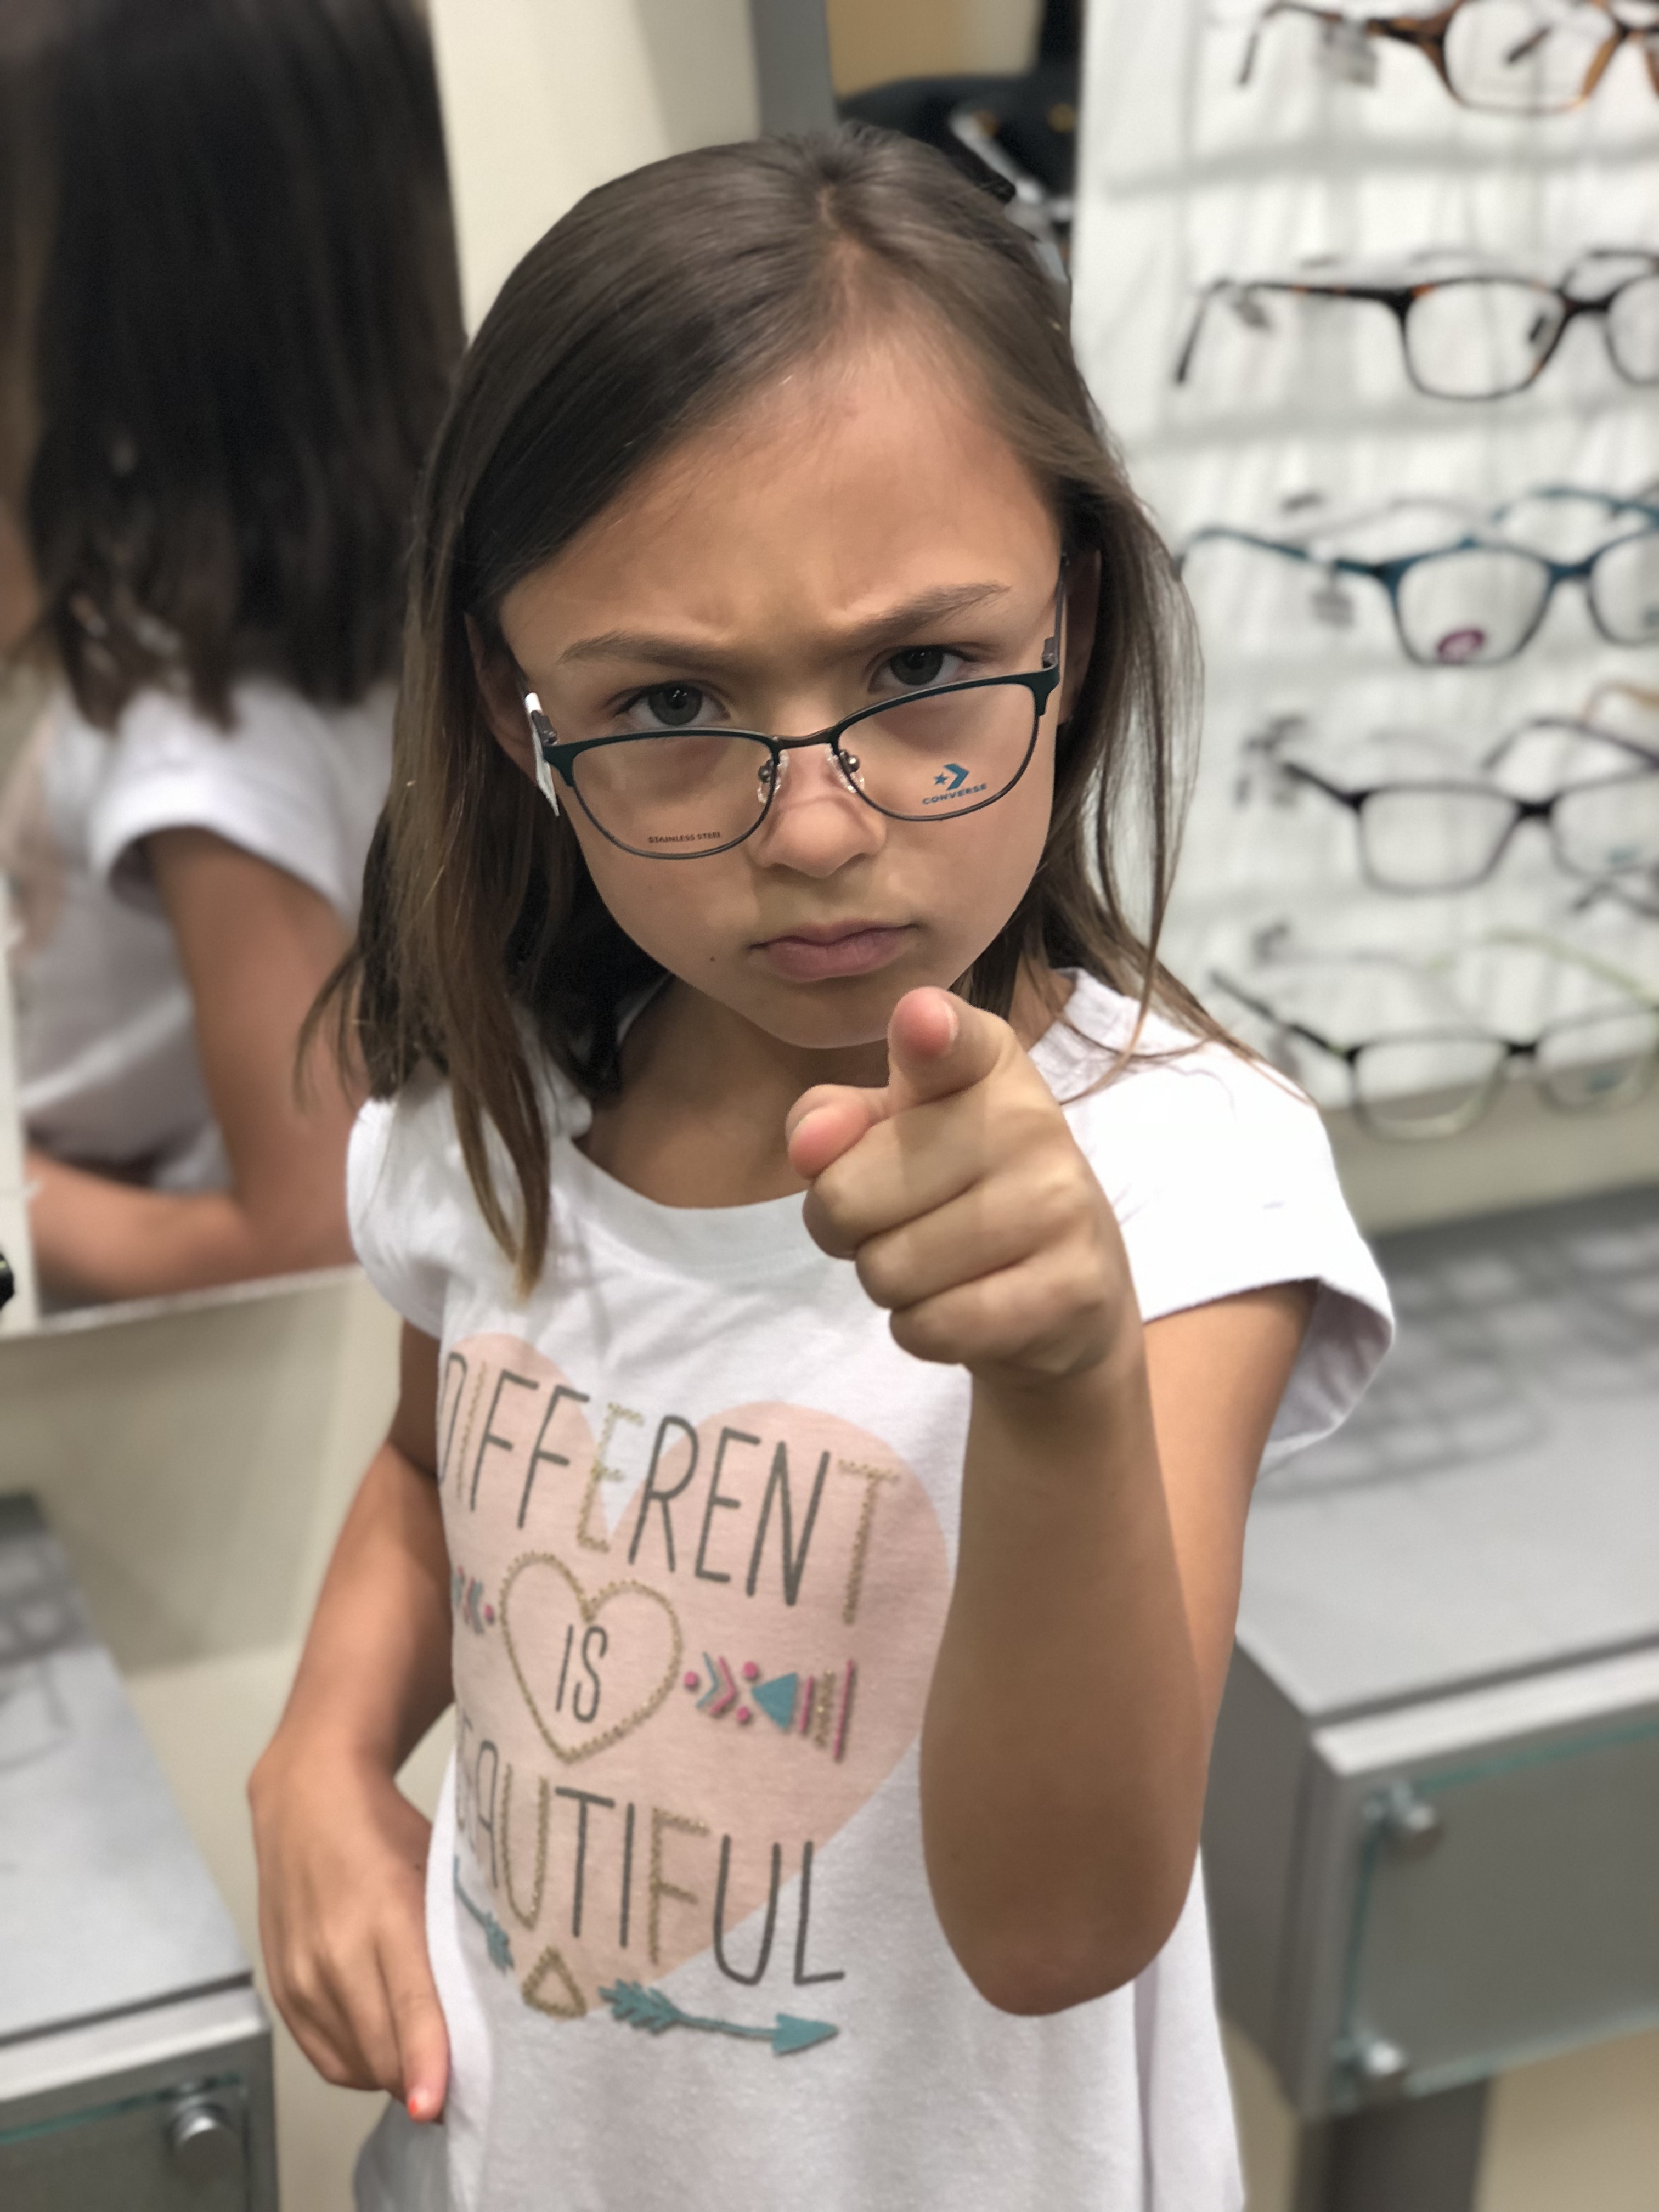 5 things parents should know before getting glasses for kids: Kids need kid frames | Sponsor